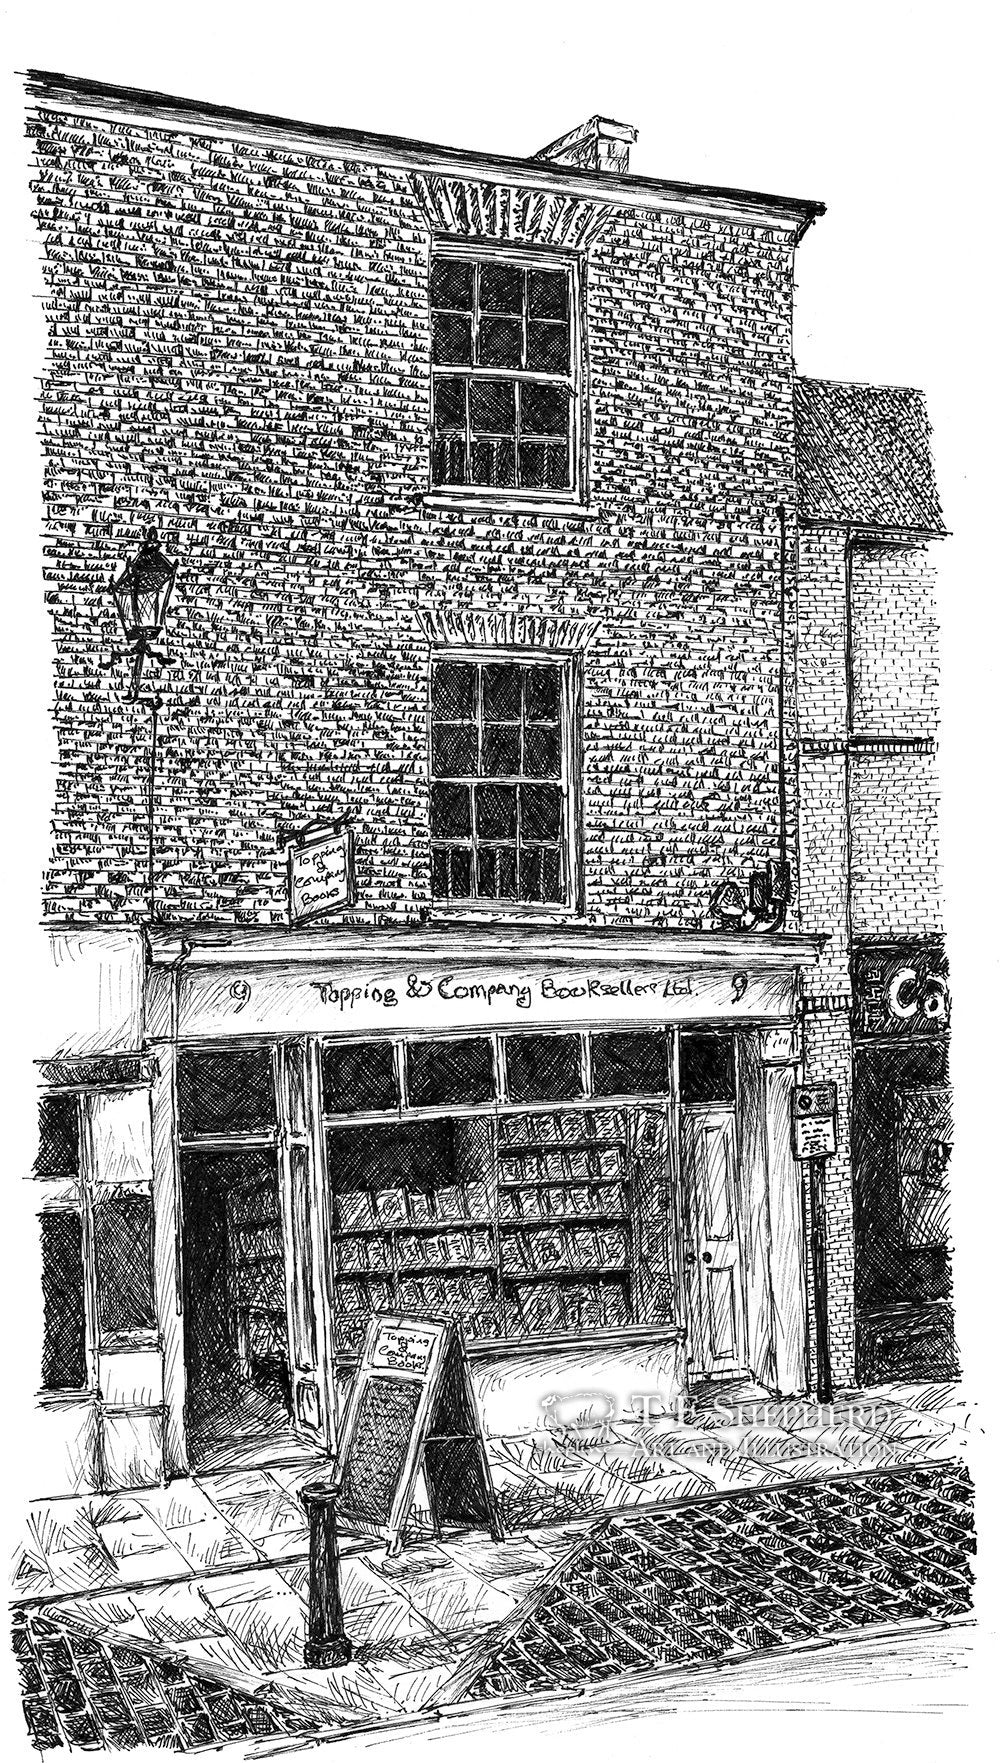 Topping and Company Booksellers, Ely